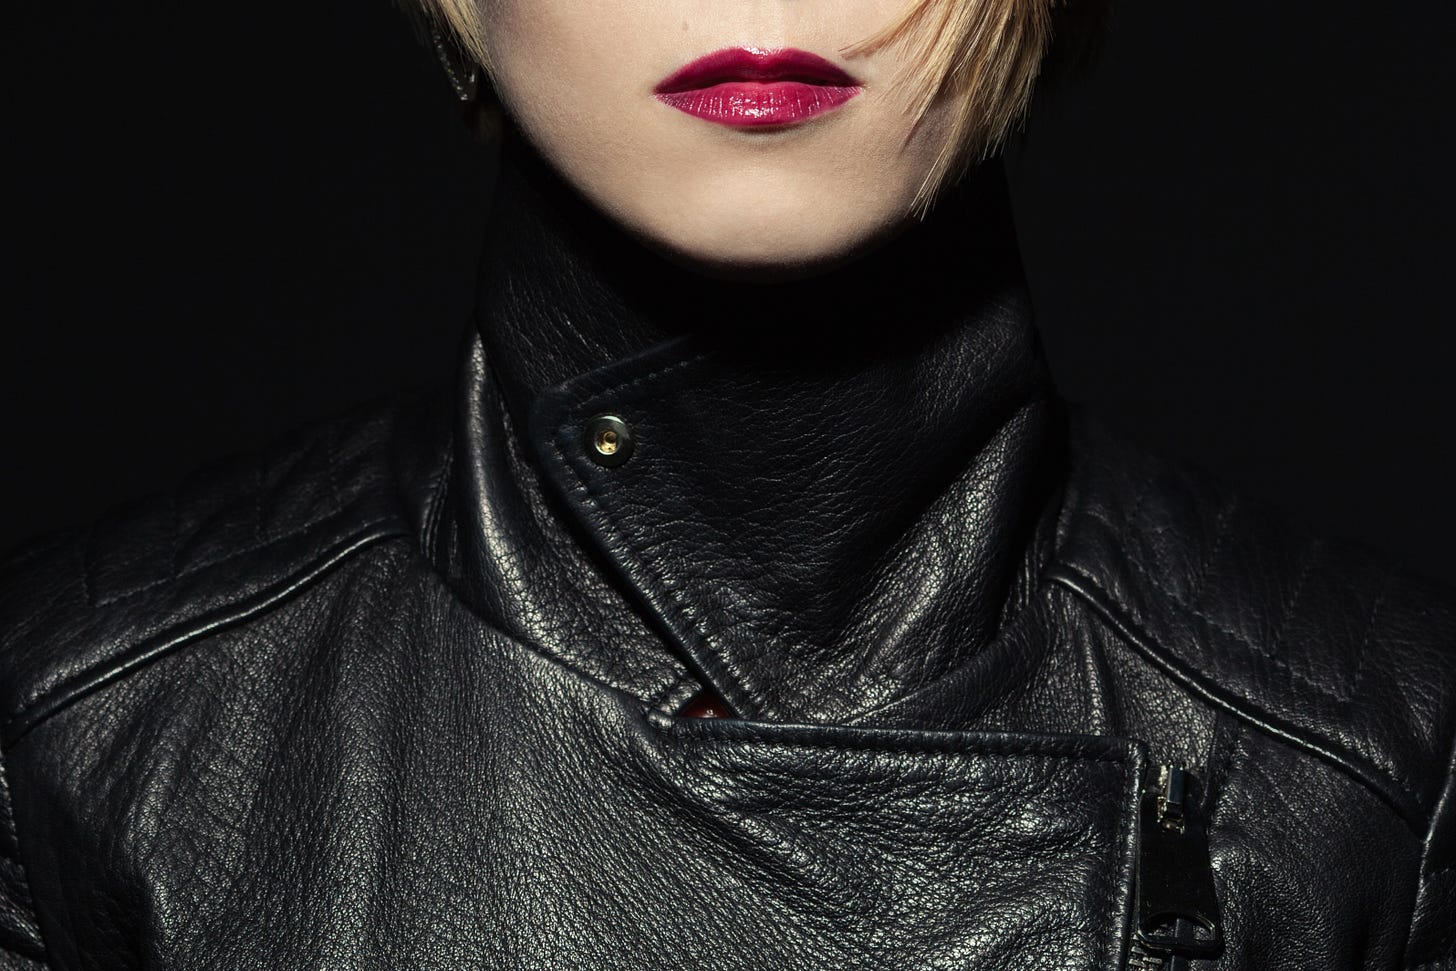 A woman in a black leather jacket and bright red lipstick, shown from the mouth down.